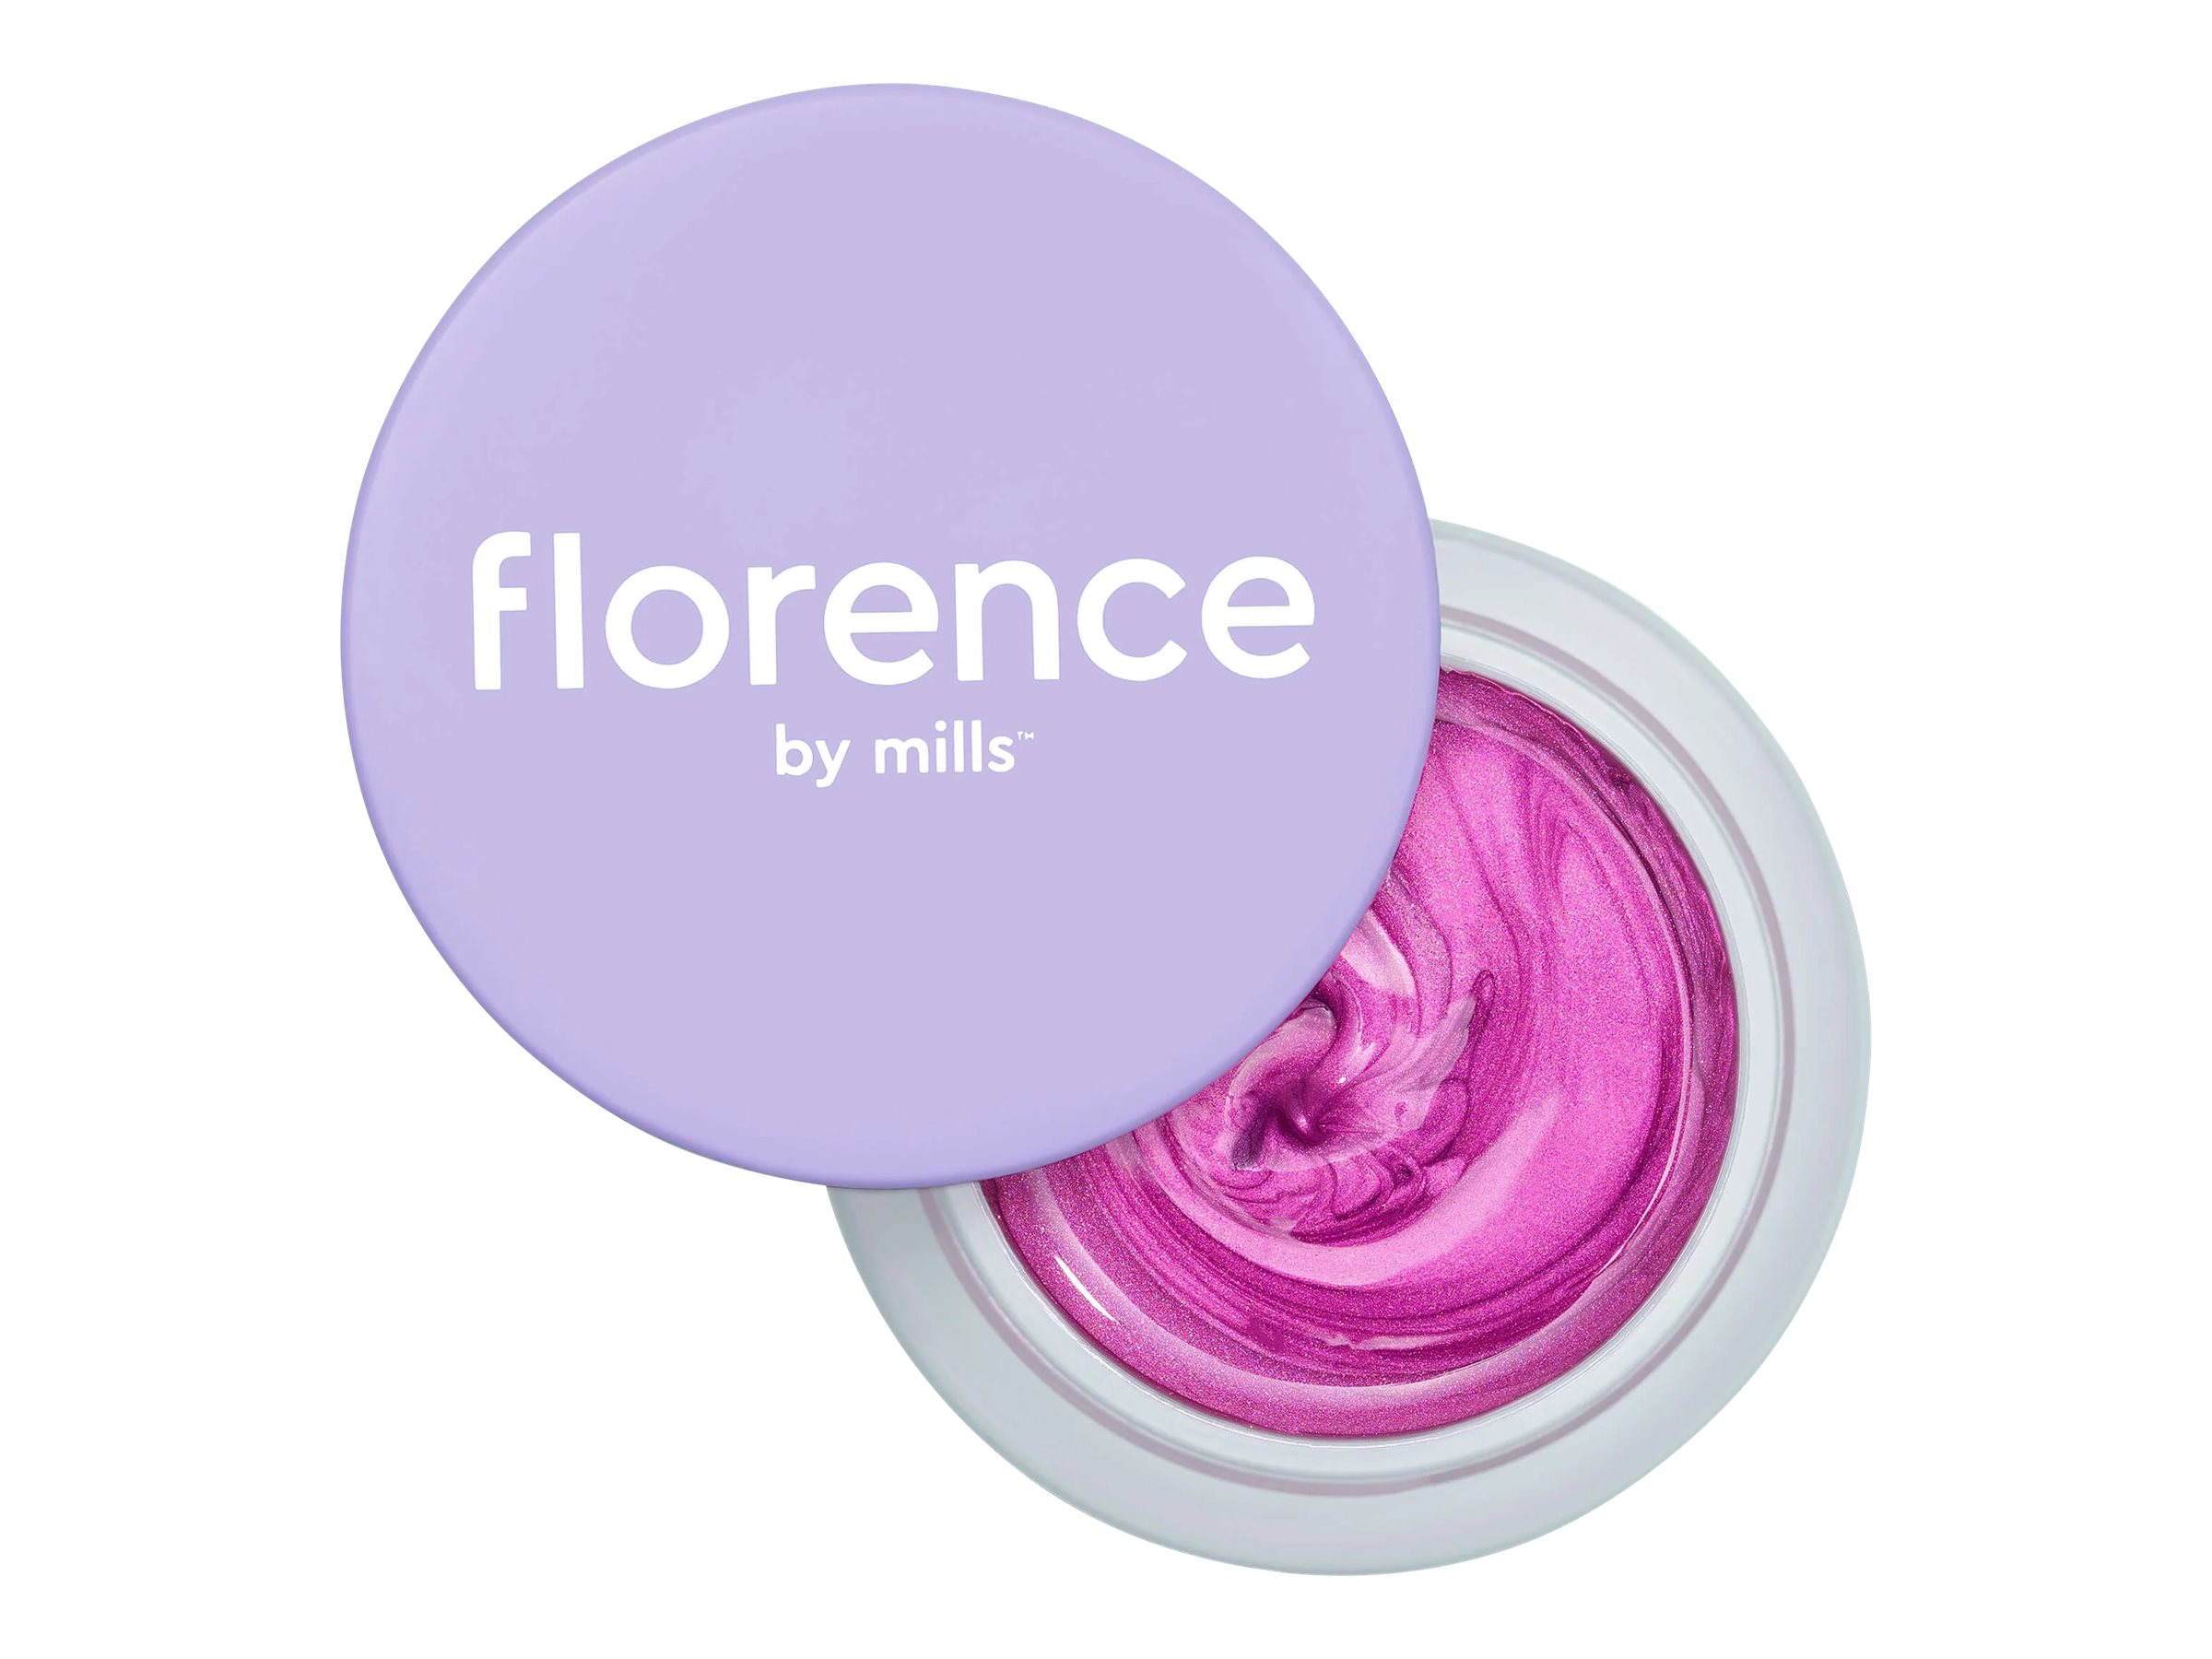 Florence by Mills Mind Glowing Peel-Off Mask - 50ml